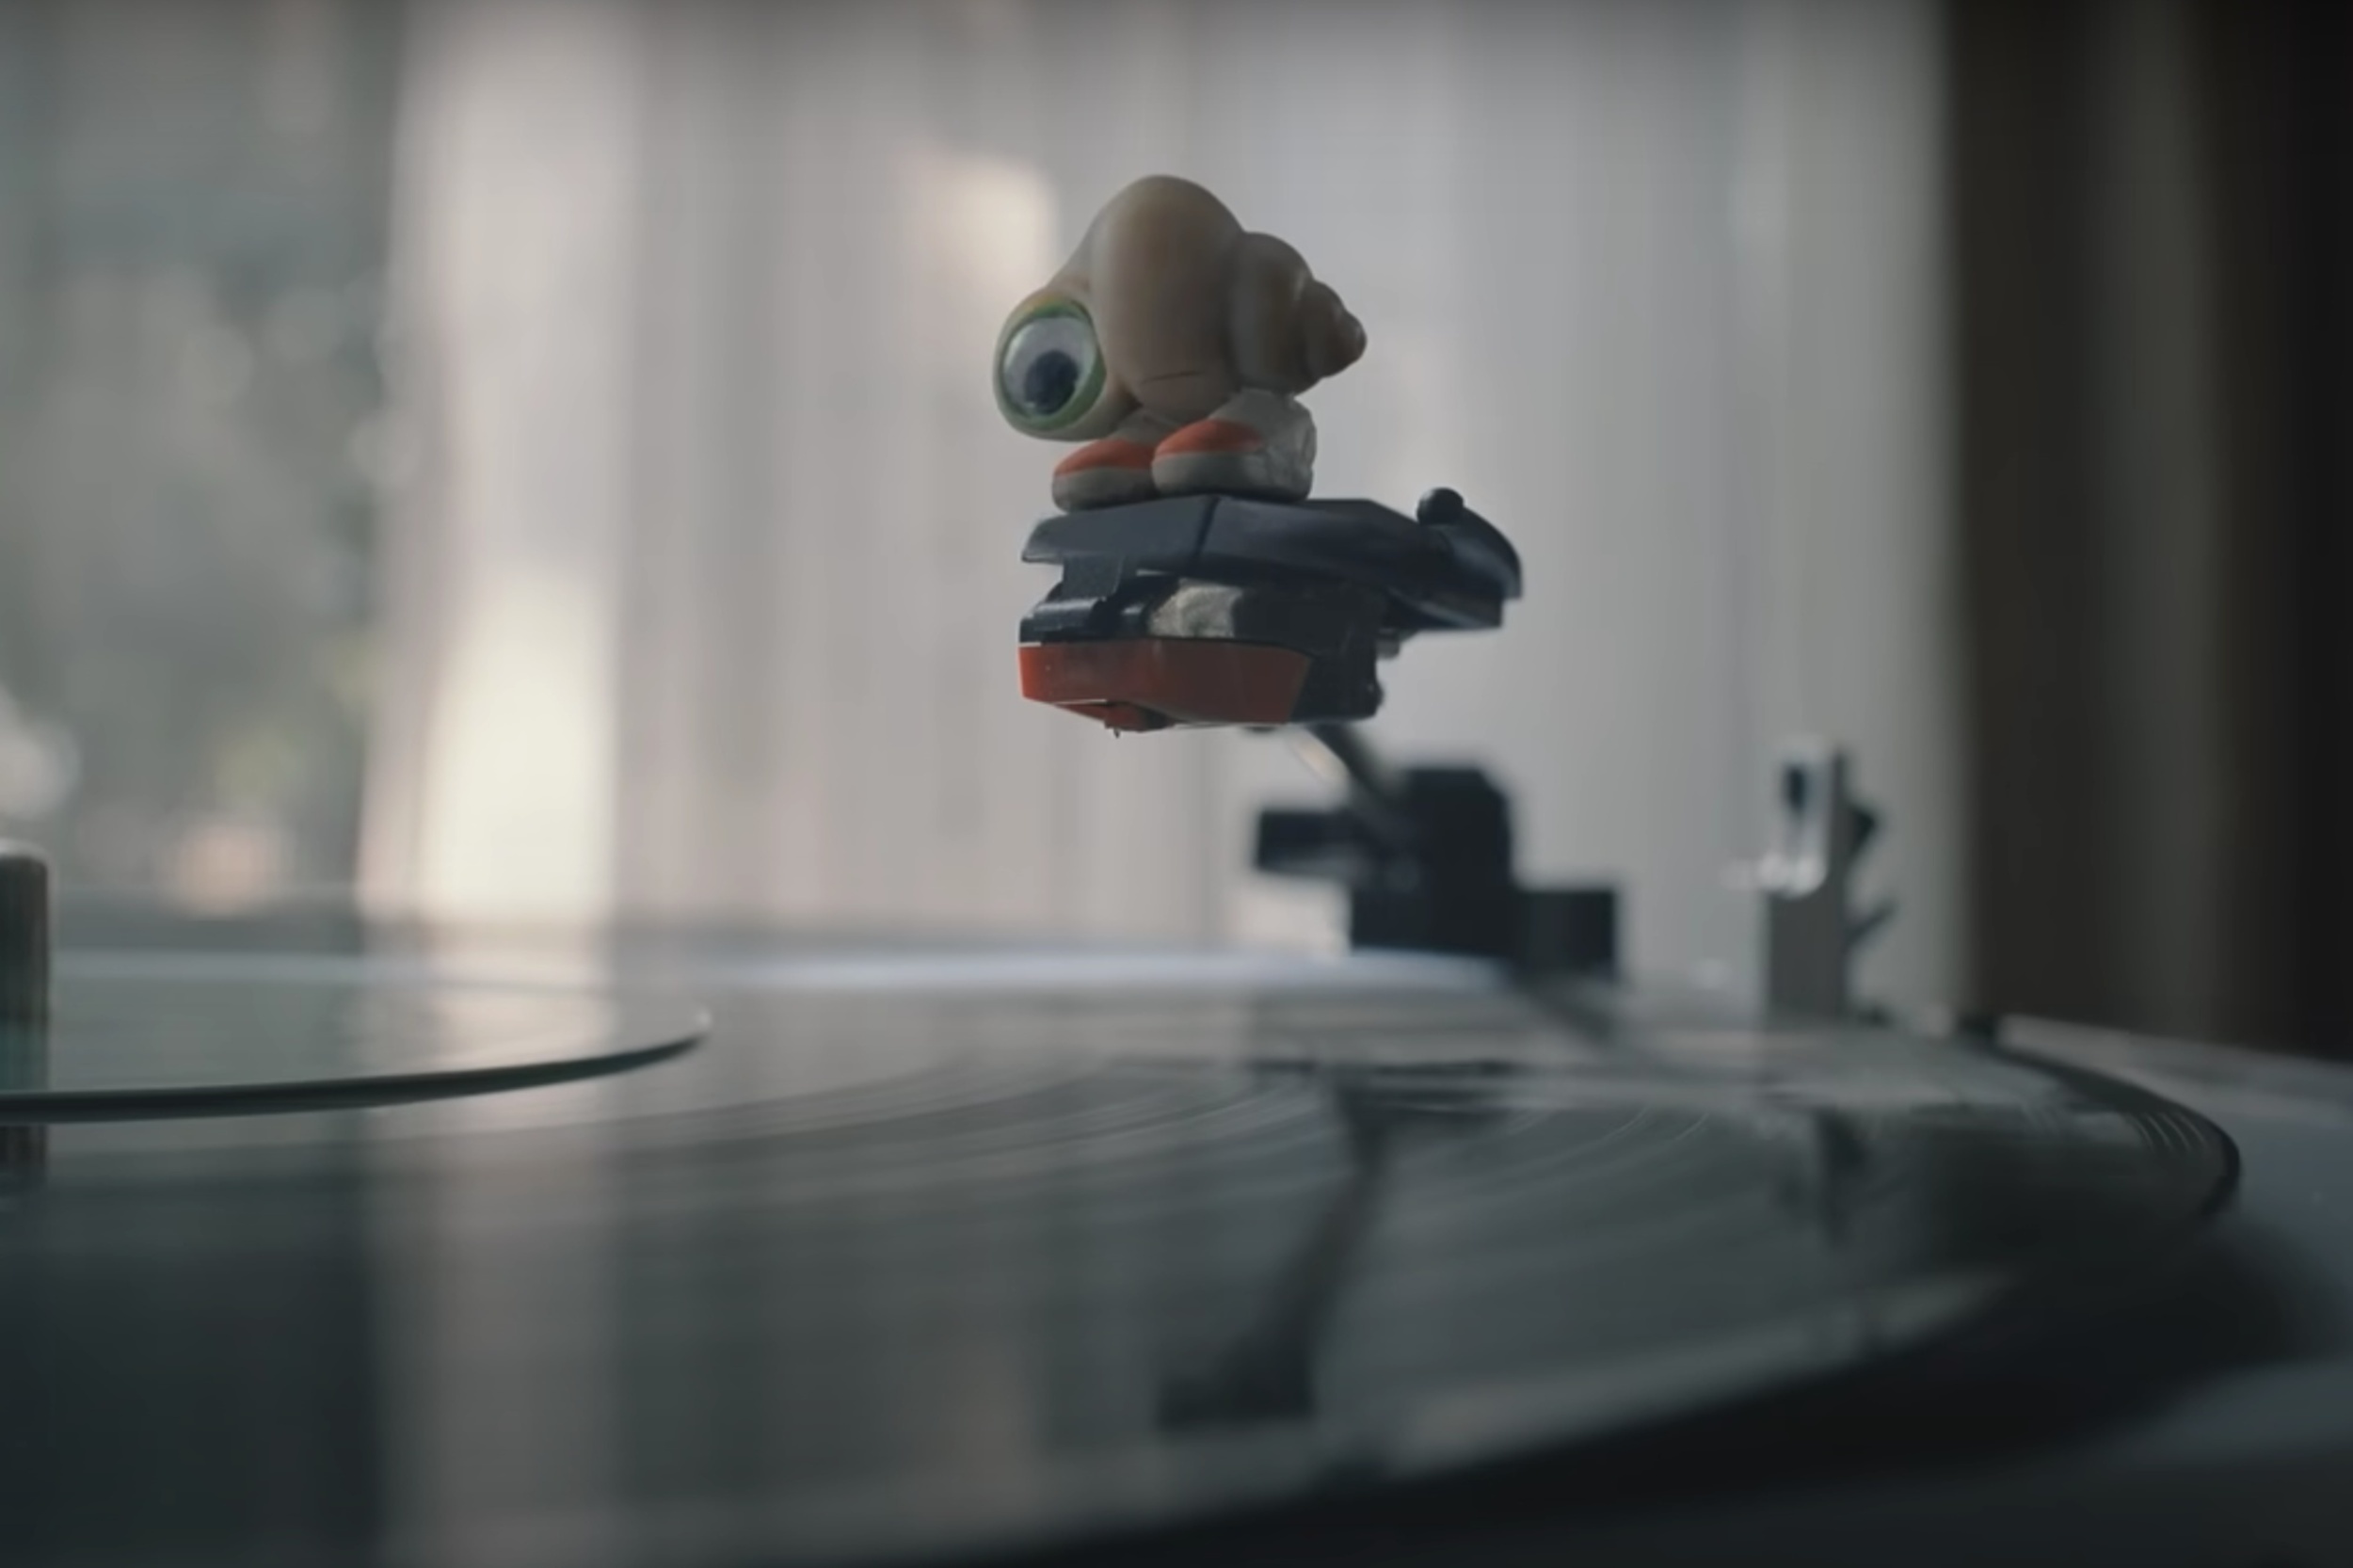 <p>From A24, <em>Marcel the Shell with Shoes On</em> is a stop-motion animated/live-action hybrid film that is the independent studio’s most family-friendly outing. Based on a series of short films, the feature follows Marcel, a tiny mollusk shell searching for his family. Living in an Airbnb, a documentary filmmaker captures Marcel’s story as it reaches millions of people worldwide. Life-affirming and ridiculously adorable, Marcel and his spirit will melt your heart.</p><p>You may also like: <a href='https://www.yardbarker.com/entertainment/articles/the_best_pop_songs_of_the_1990s_022824/s1__39688363'>The best pop songs of the 1990s</a></p>